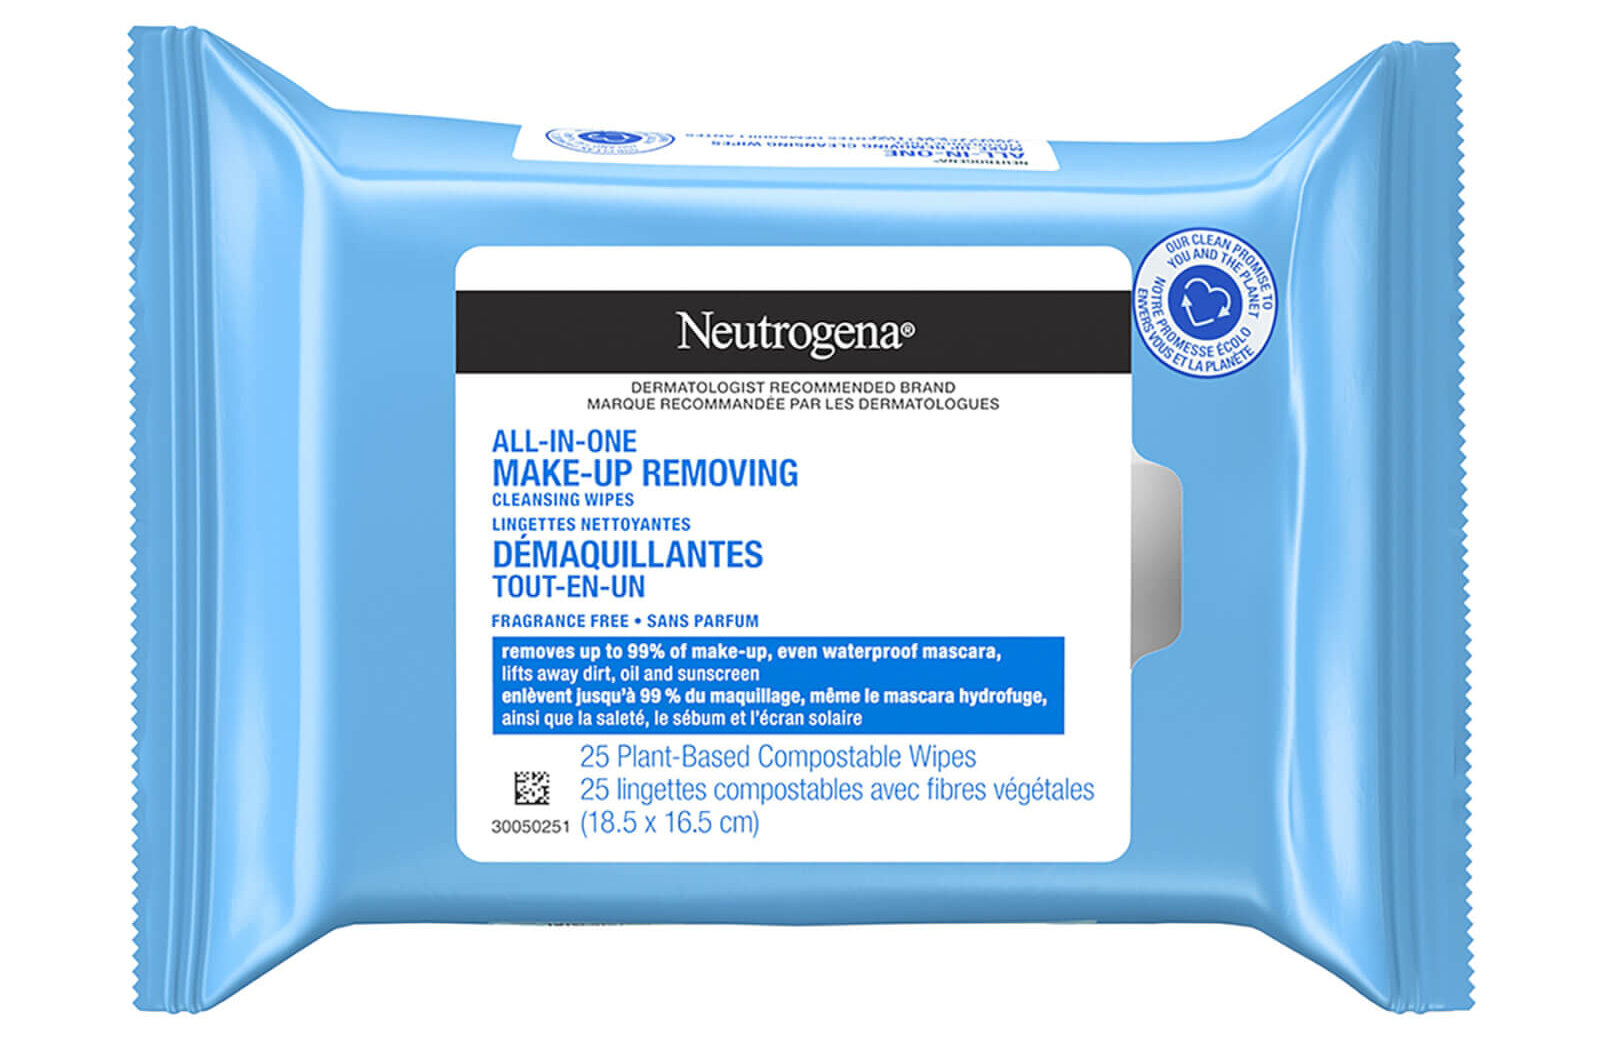 Let the Neutrogena® Double Cleansing Routine Light Up Your Skin This Diwali